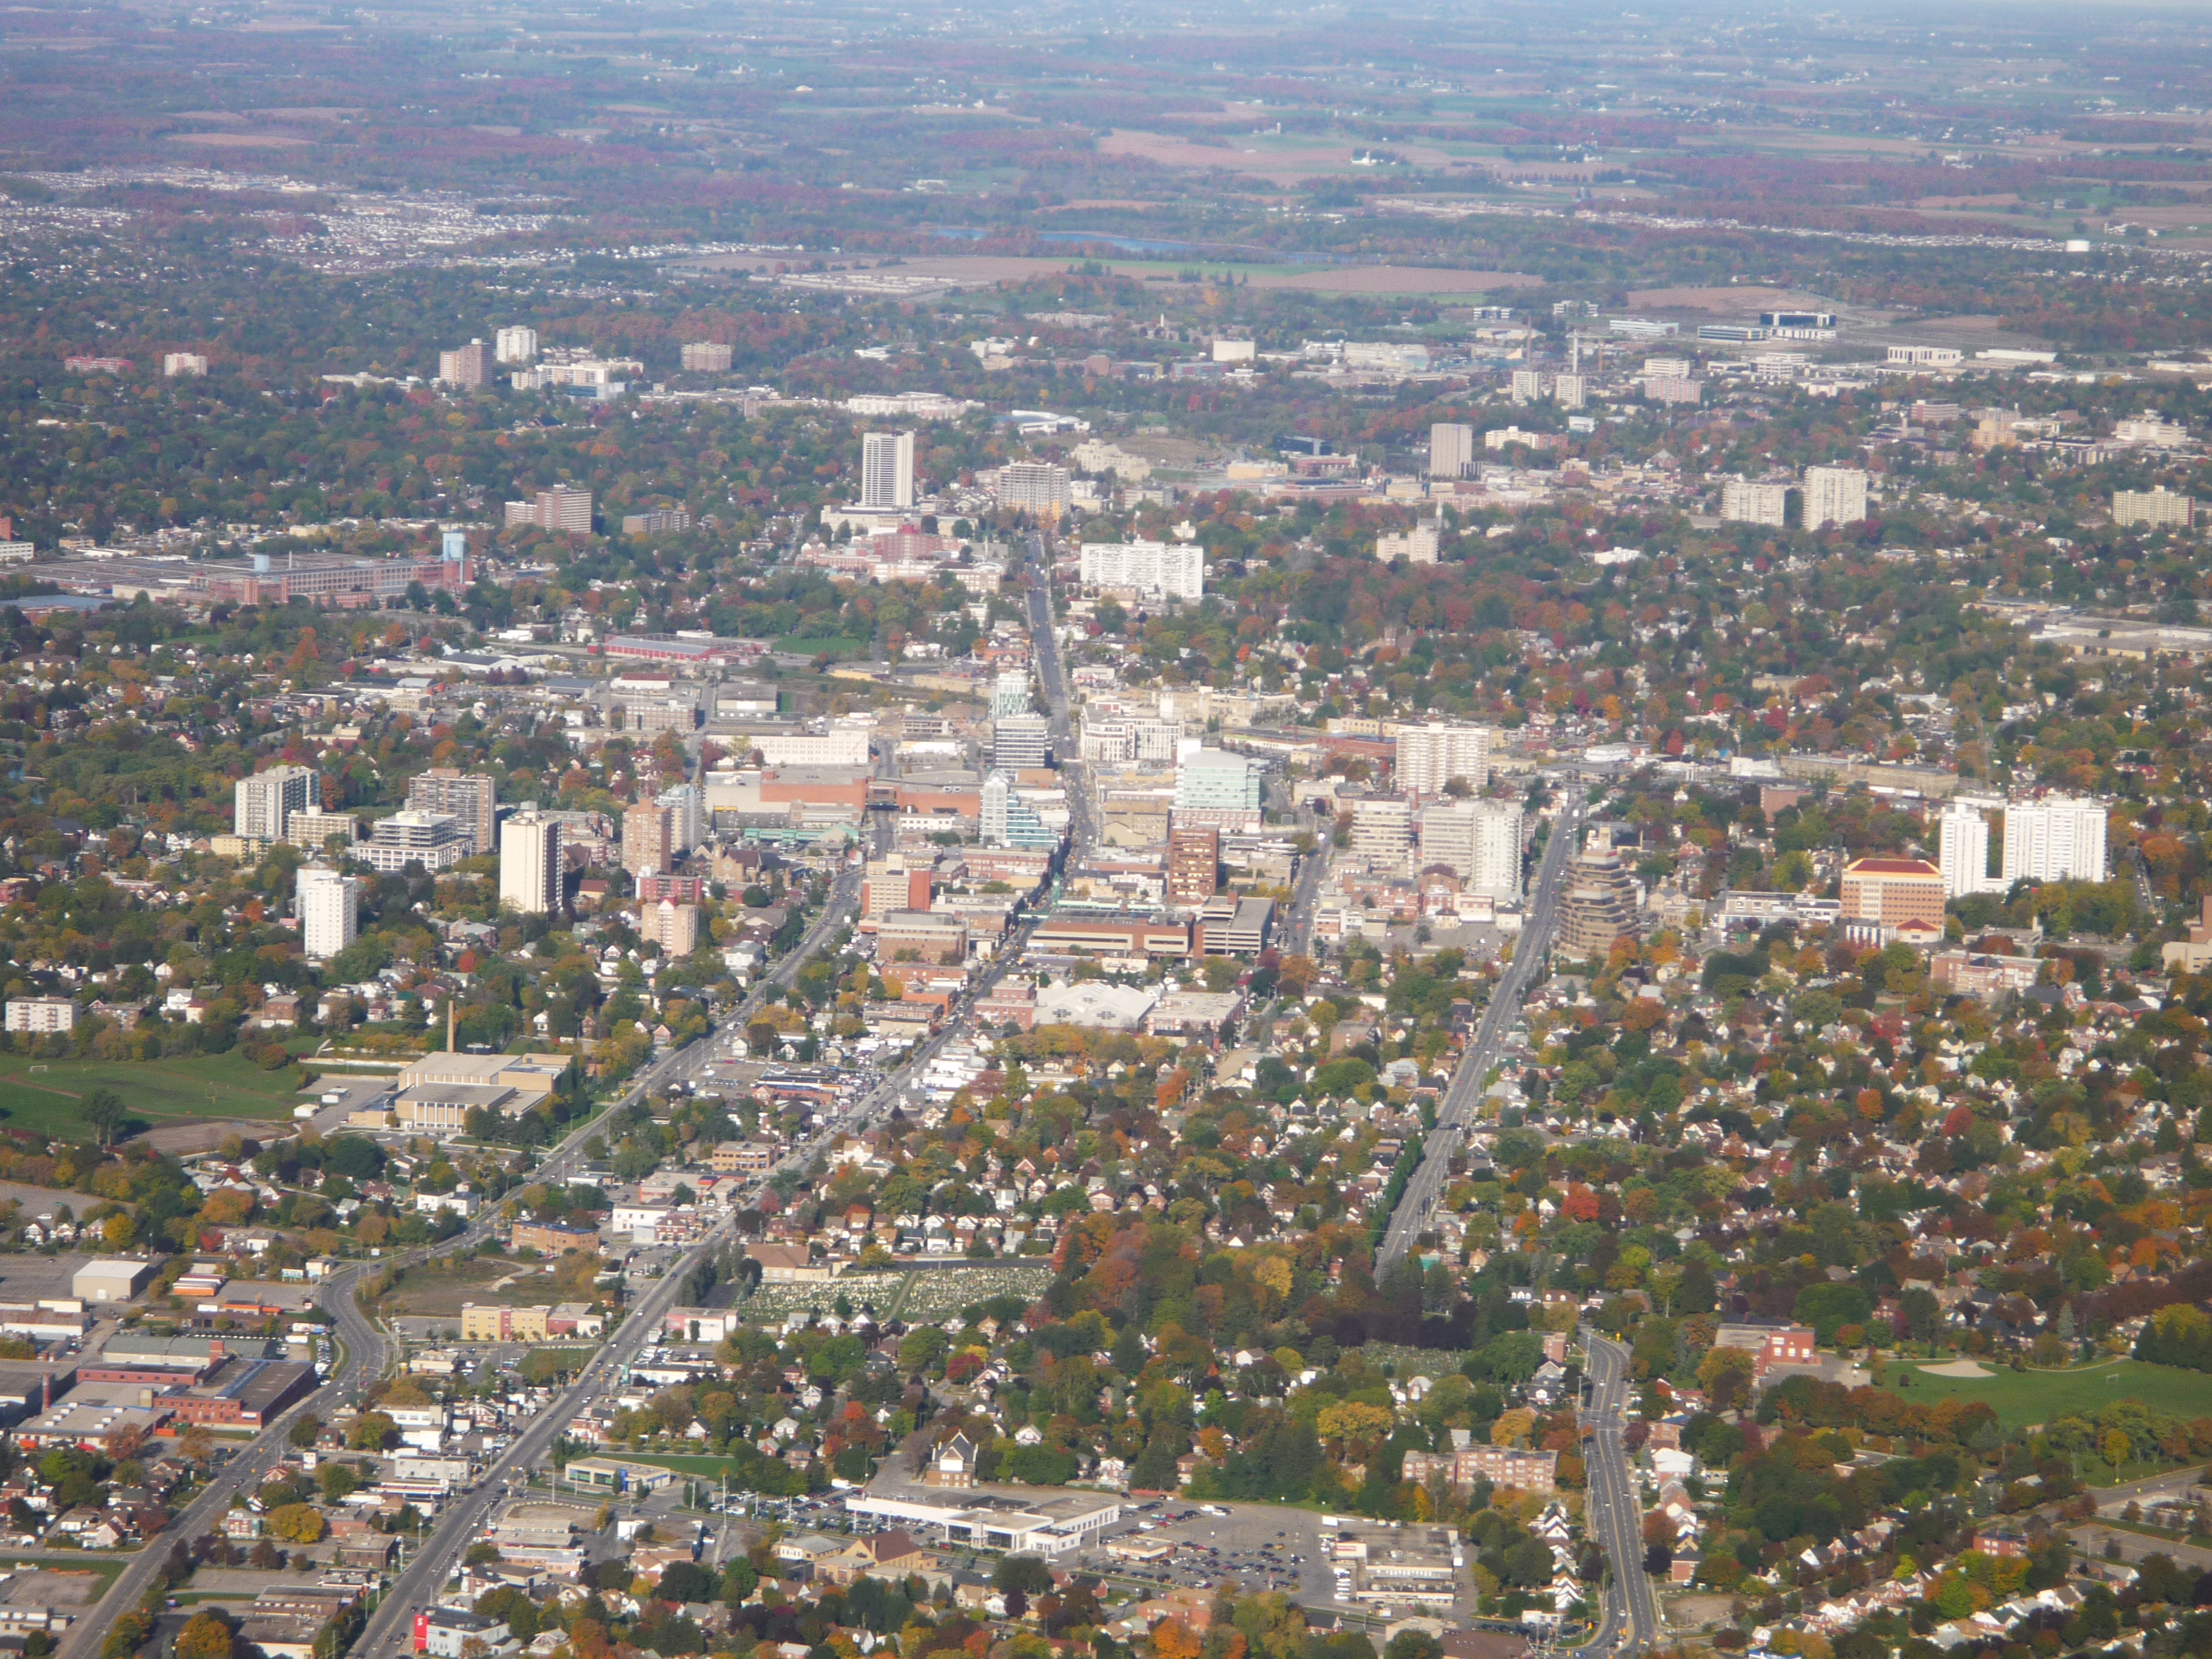 file-arial-photo-of-downtown-kitchener-ontario-jpg-wikimedia-commons